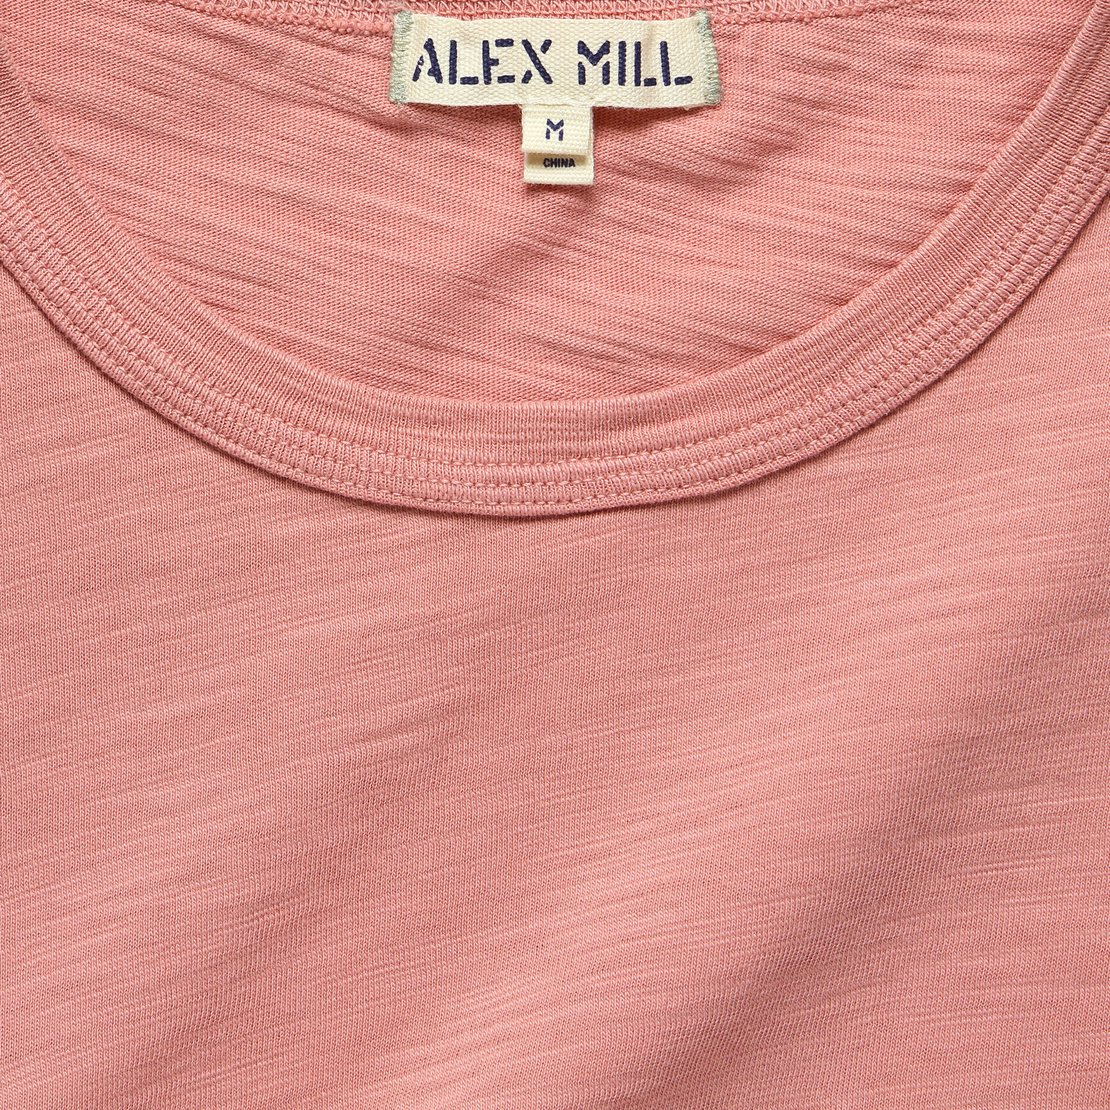 Standard Crew Tee - Dusty Rose - Alex Mill - STAG Provisions - Tops - S/S Tee